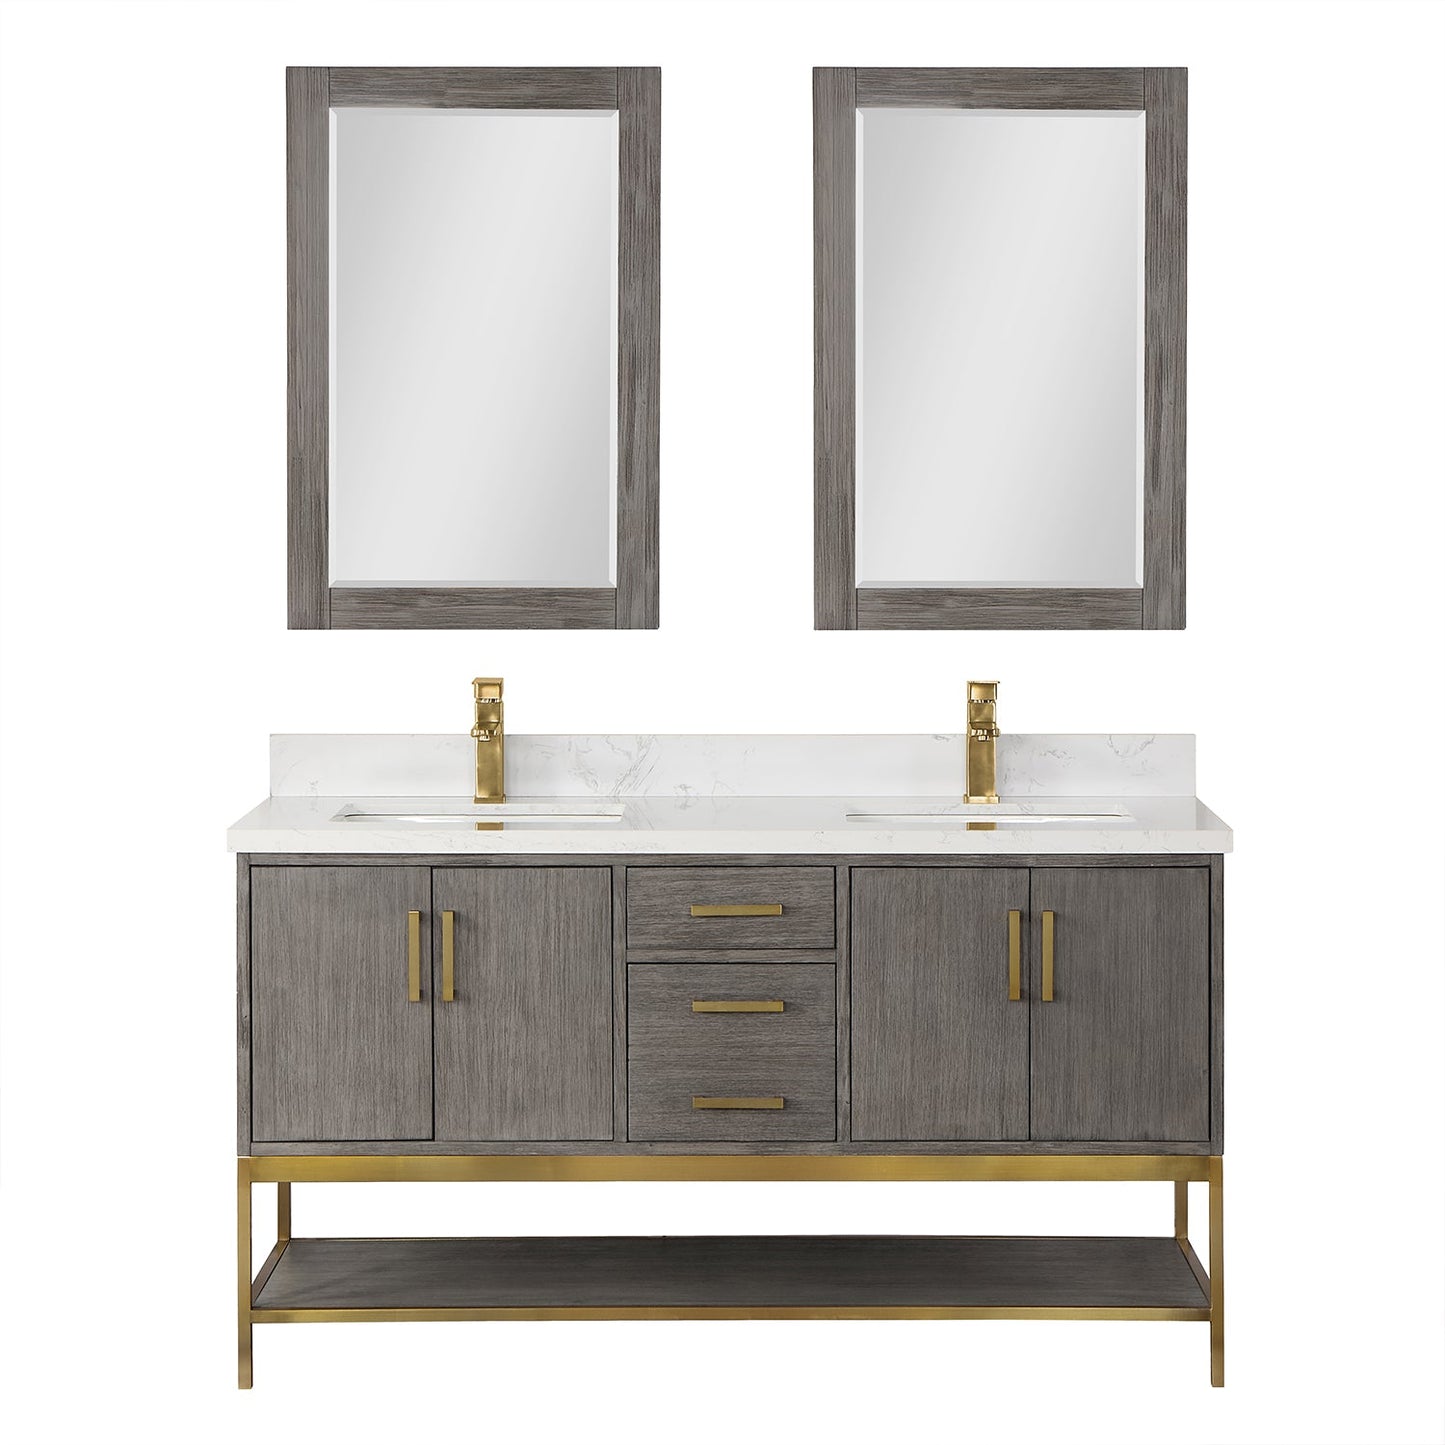 Wildy 60" Double Bathroom Vanity Set in Classical Grey with Grain White Composite Stone Countertop with Mirror